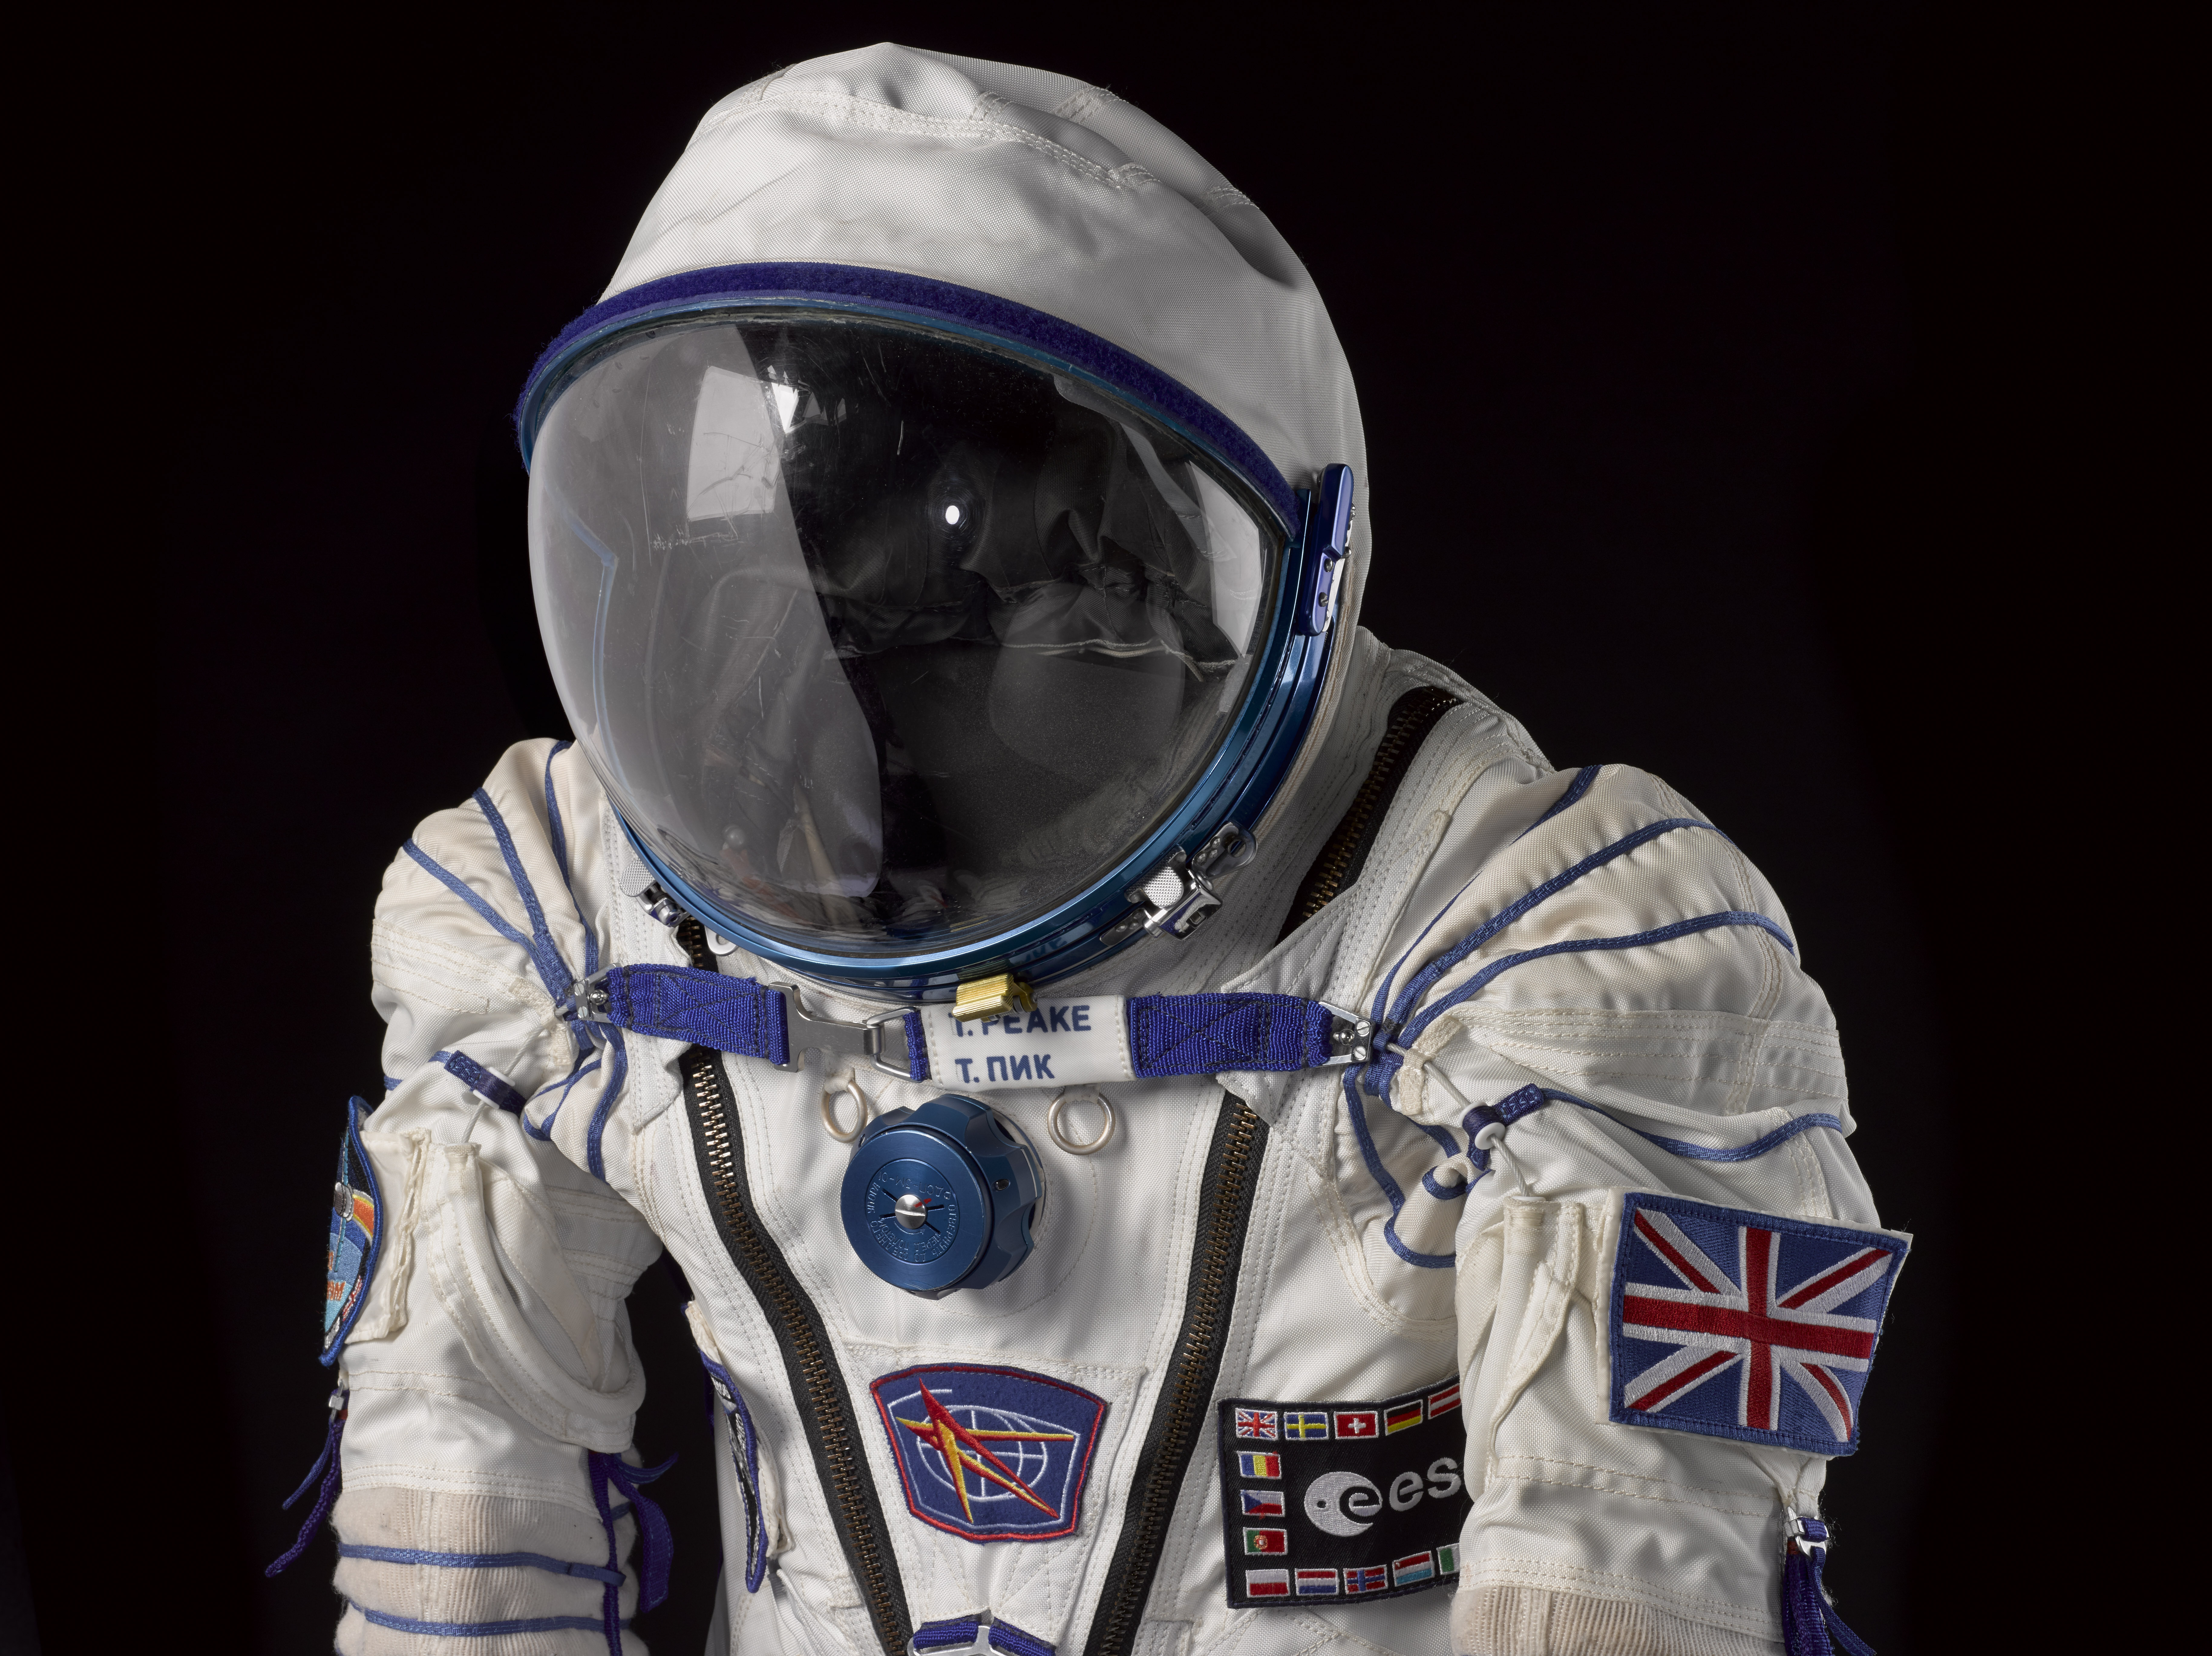 Sokol KV-2 emergency suit worn by British ESA astronaut Tim Peake and now part of the Science Museum Group Collection.